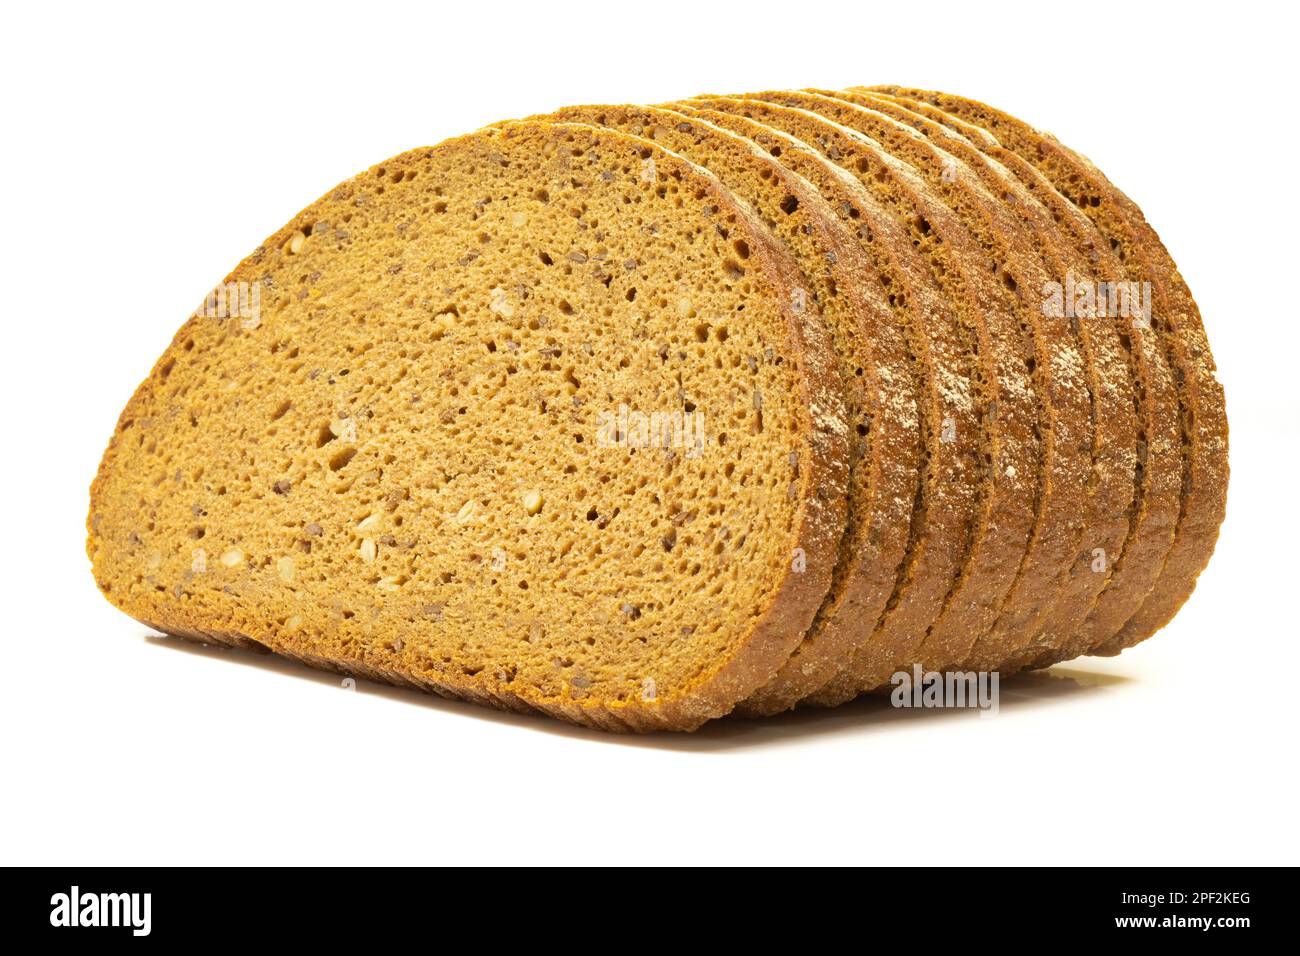 Stack of diet multigrain bread slices isolated on white background Stock Photo